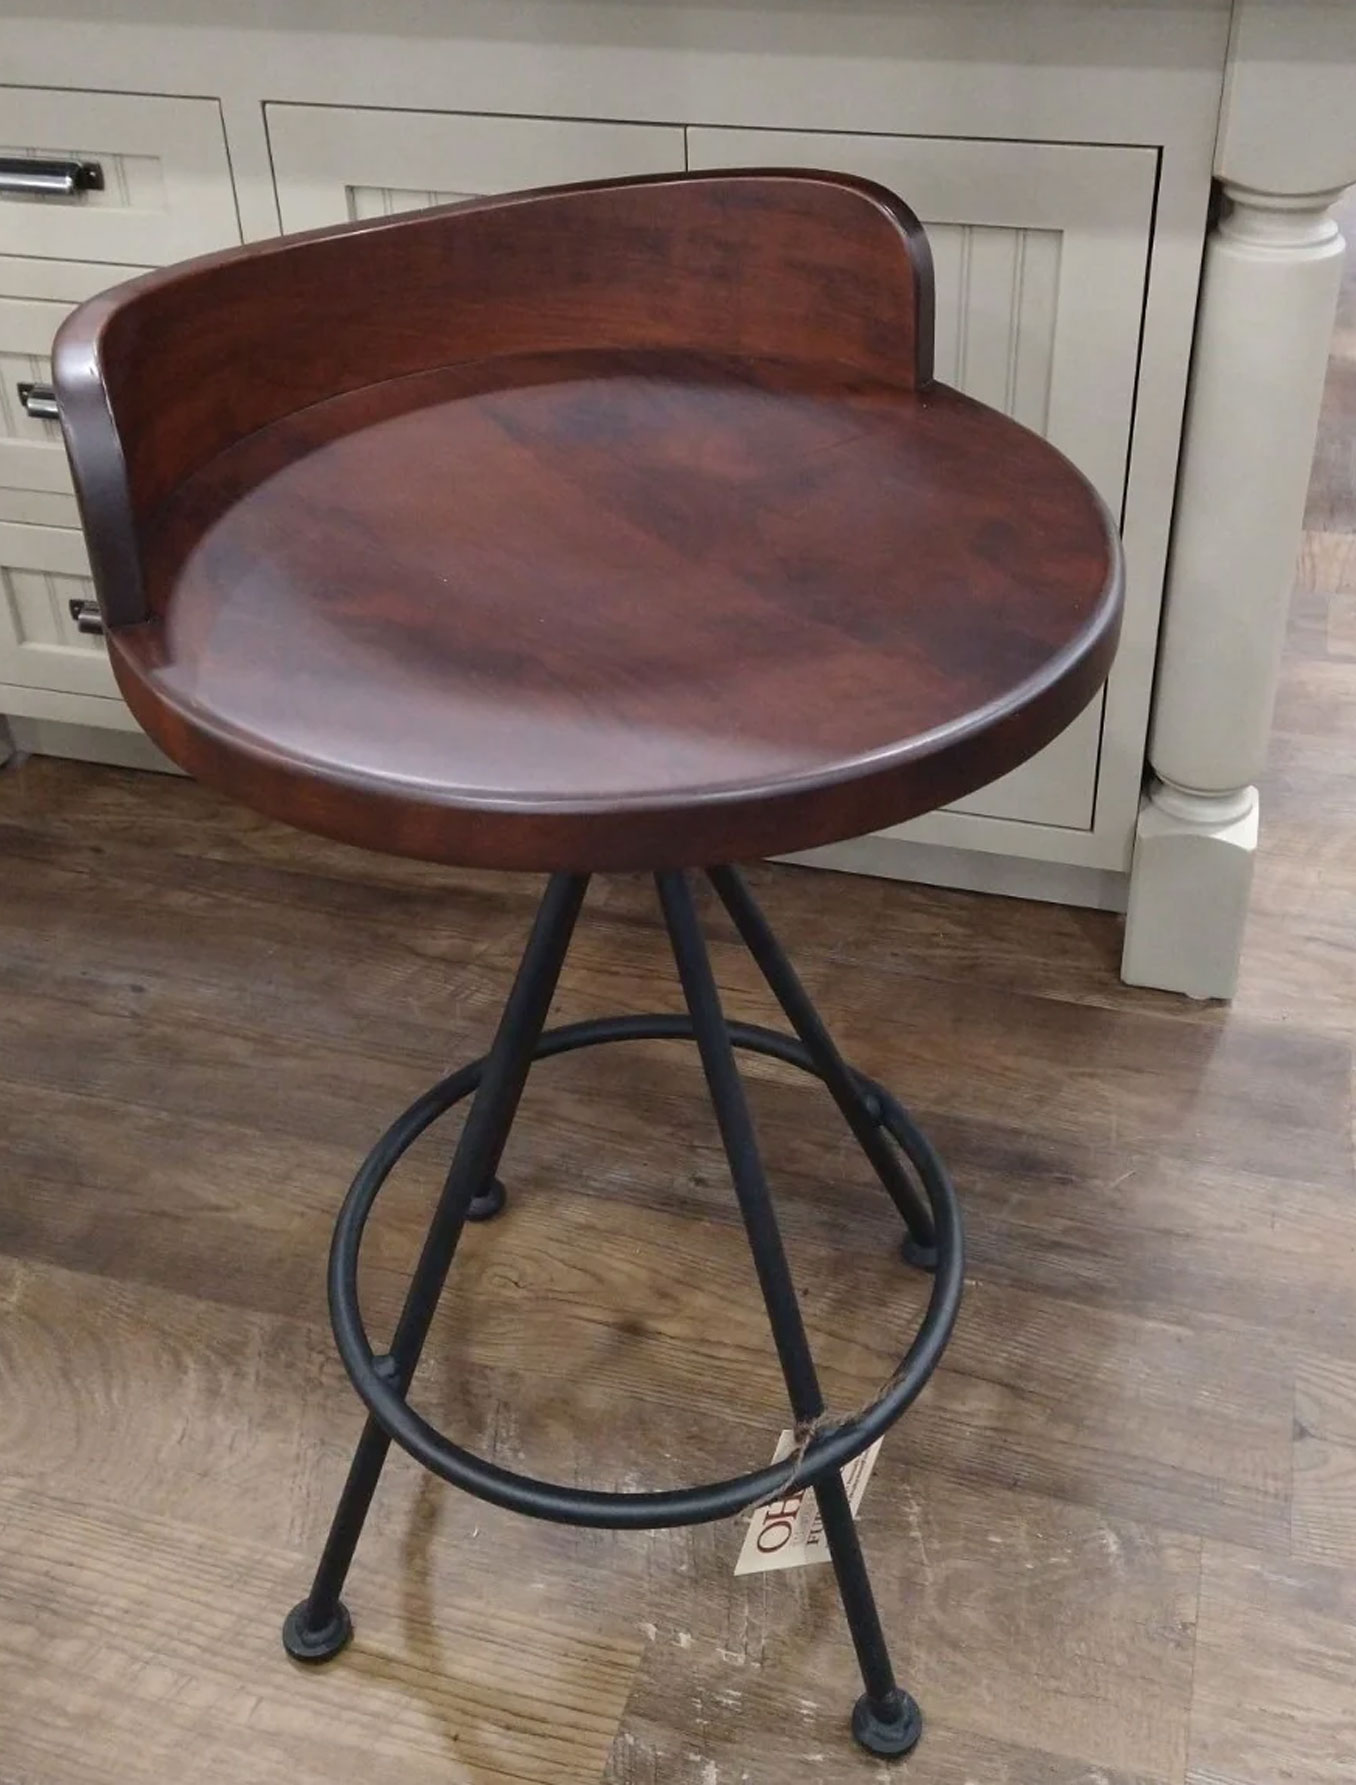 Rod 24 inch Swivel Stool with Back in Cherry